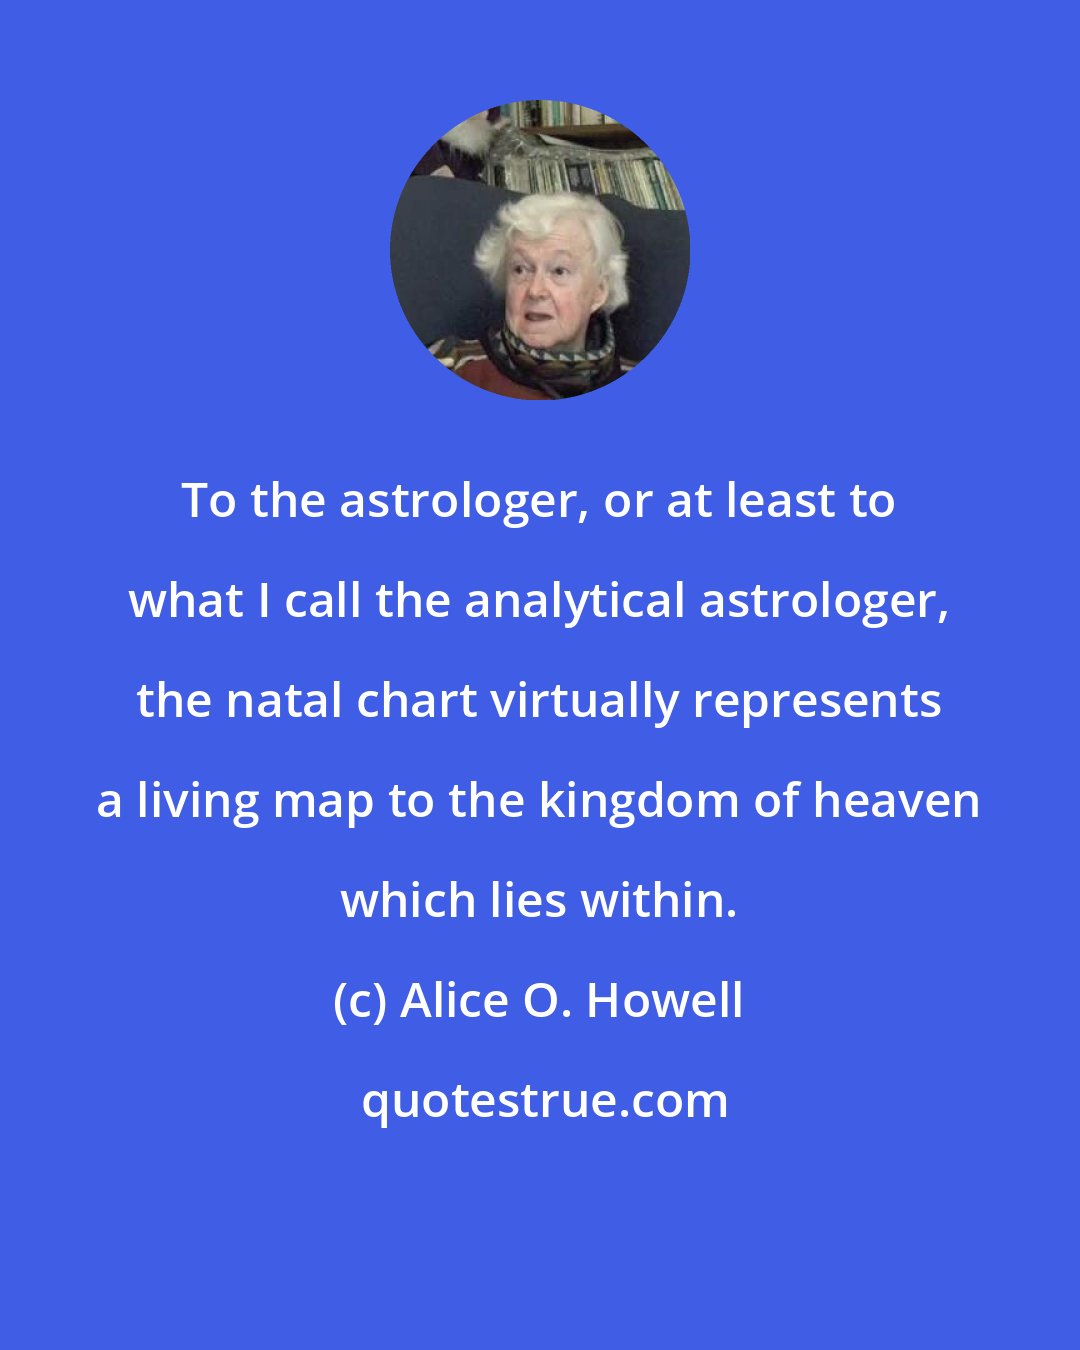 Alice O. Howell: To the astrologer, or at least to what I call the analytical astrologer, the natal chart virtually represents a living map to the kingdom of heaven which lies within.